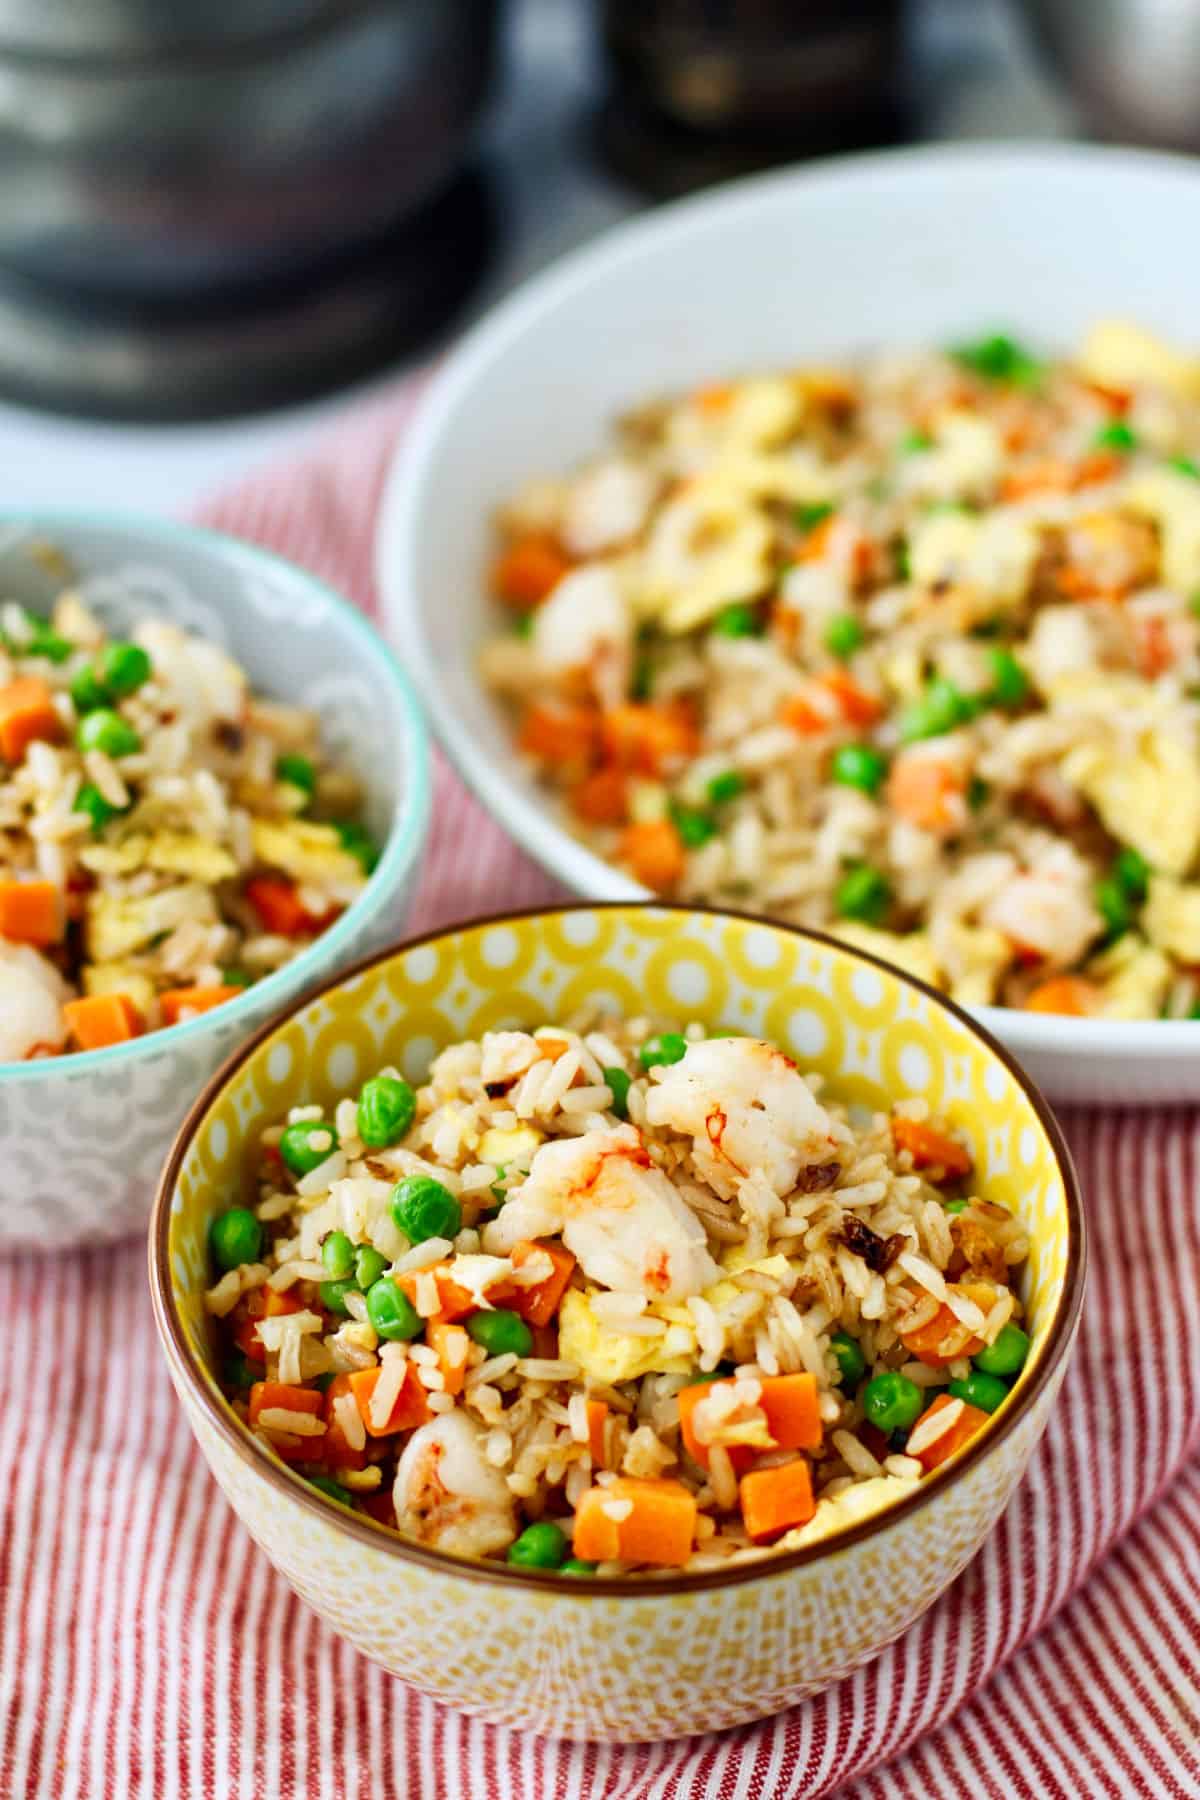 Quick Shrimp Fried Rice with Peas and Carrots in different colored bowls.